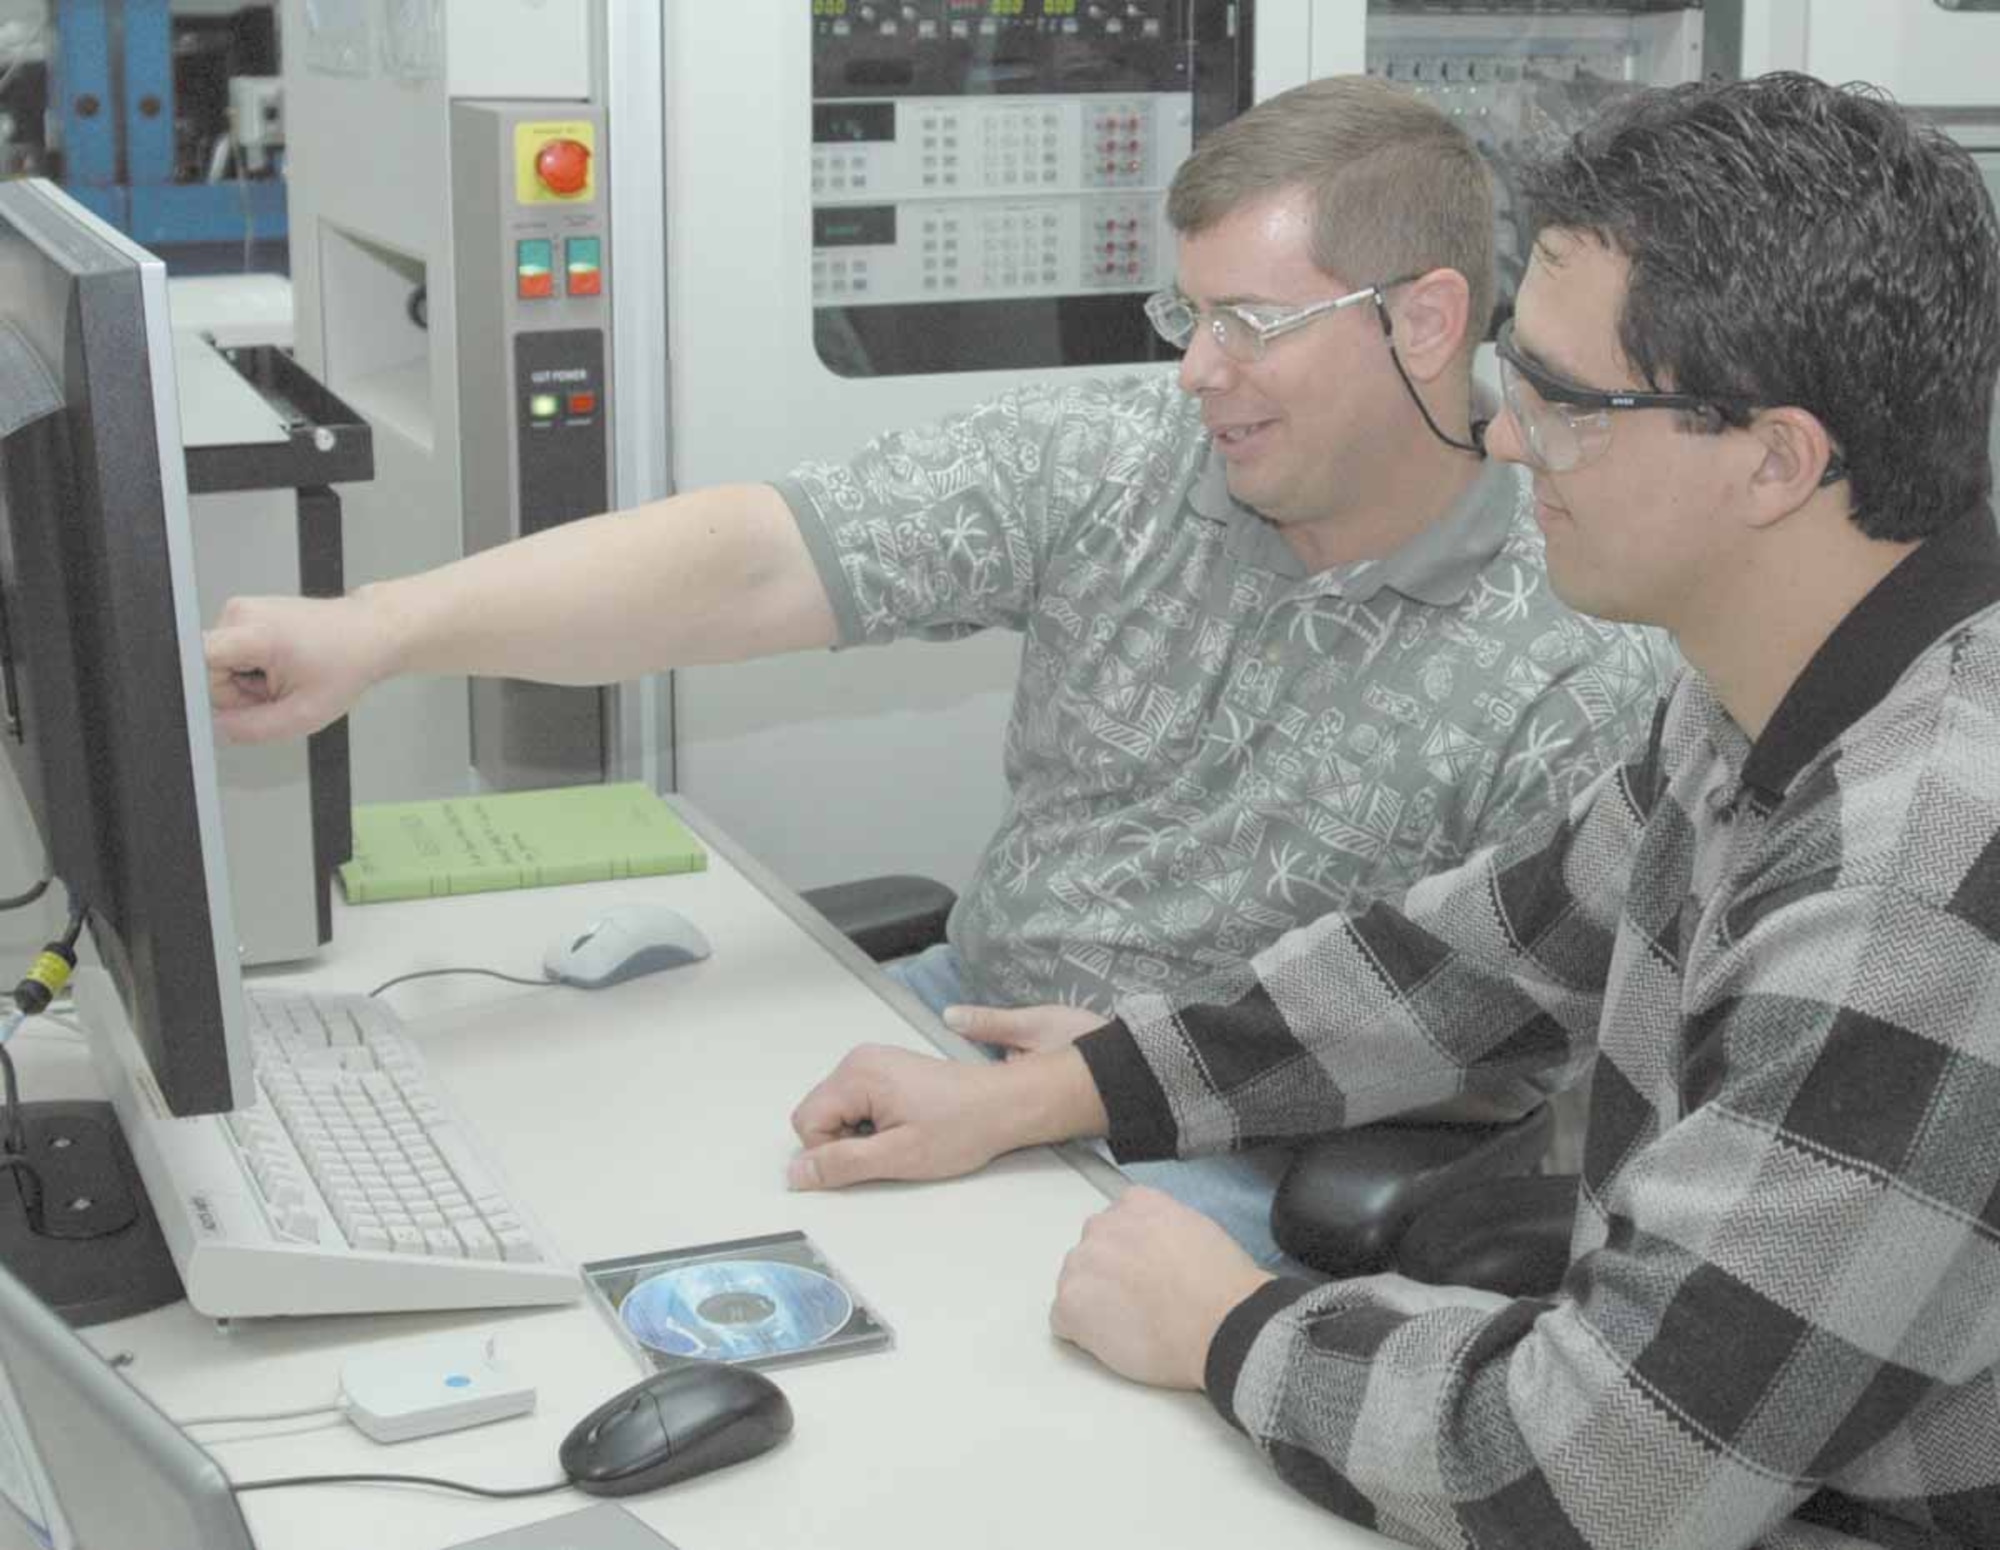 Jim Danscuk, electronics engineer and Nick Hahn, project leader with the 555th Software Maintenance Squadron, prepare to load the final version of the test program set software.  (Air Force photo by Ron Mullan)